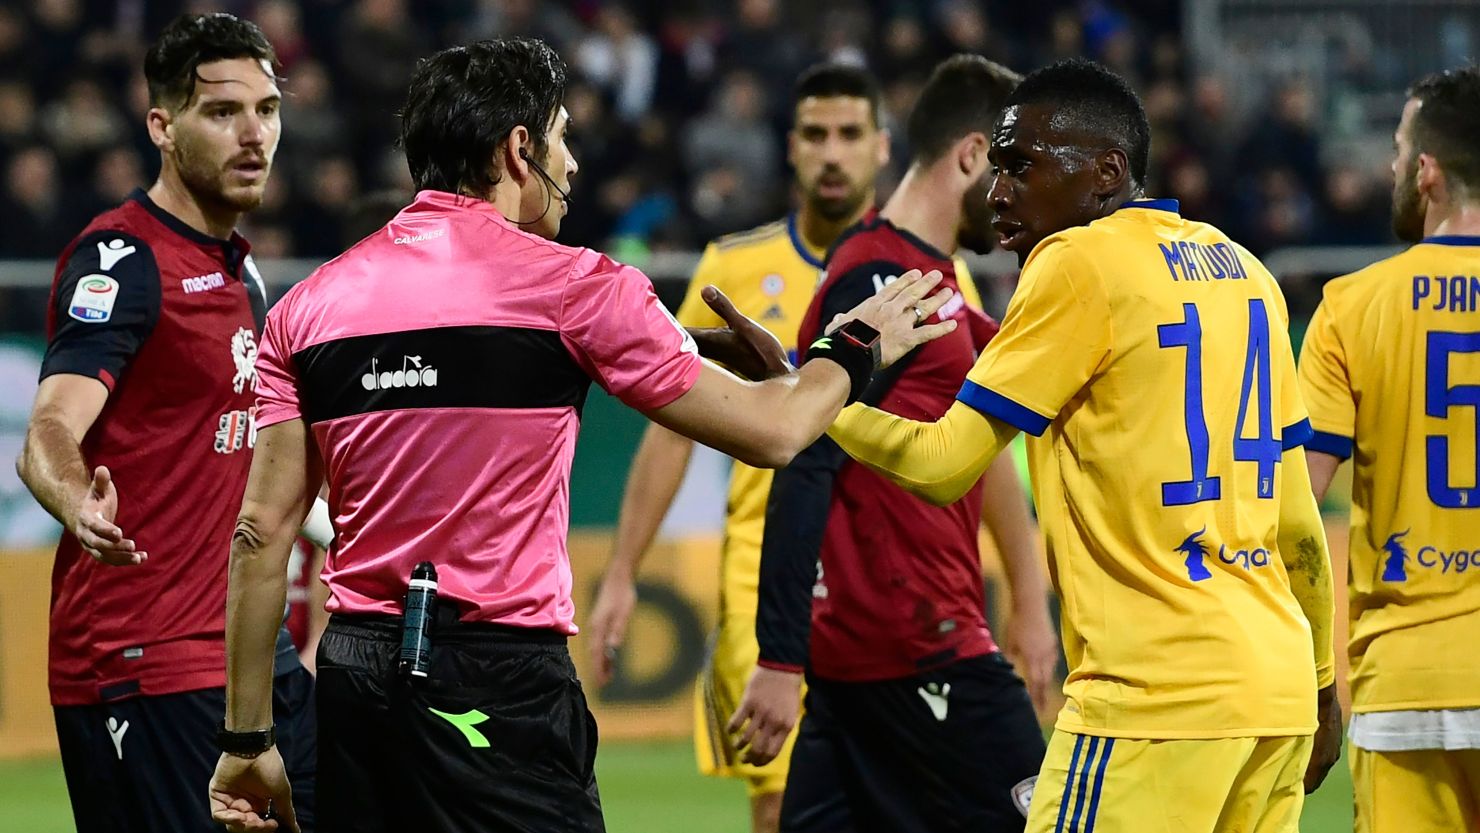 Blaise Matuidi talks with Italian referee Gianpaolo Calvarese after he suffered racist abuse during the Serie A game against Cagliari.